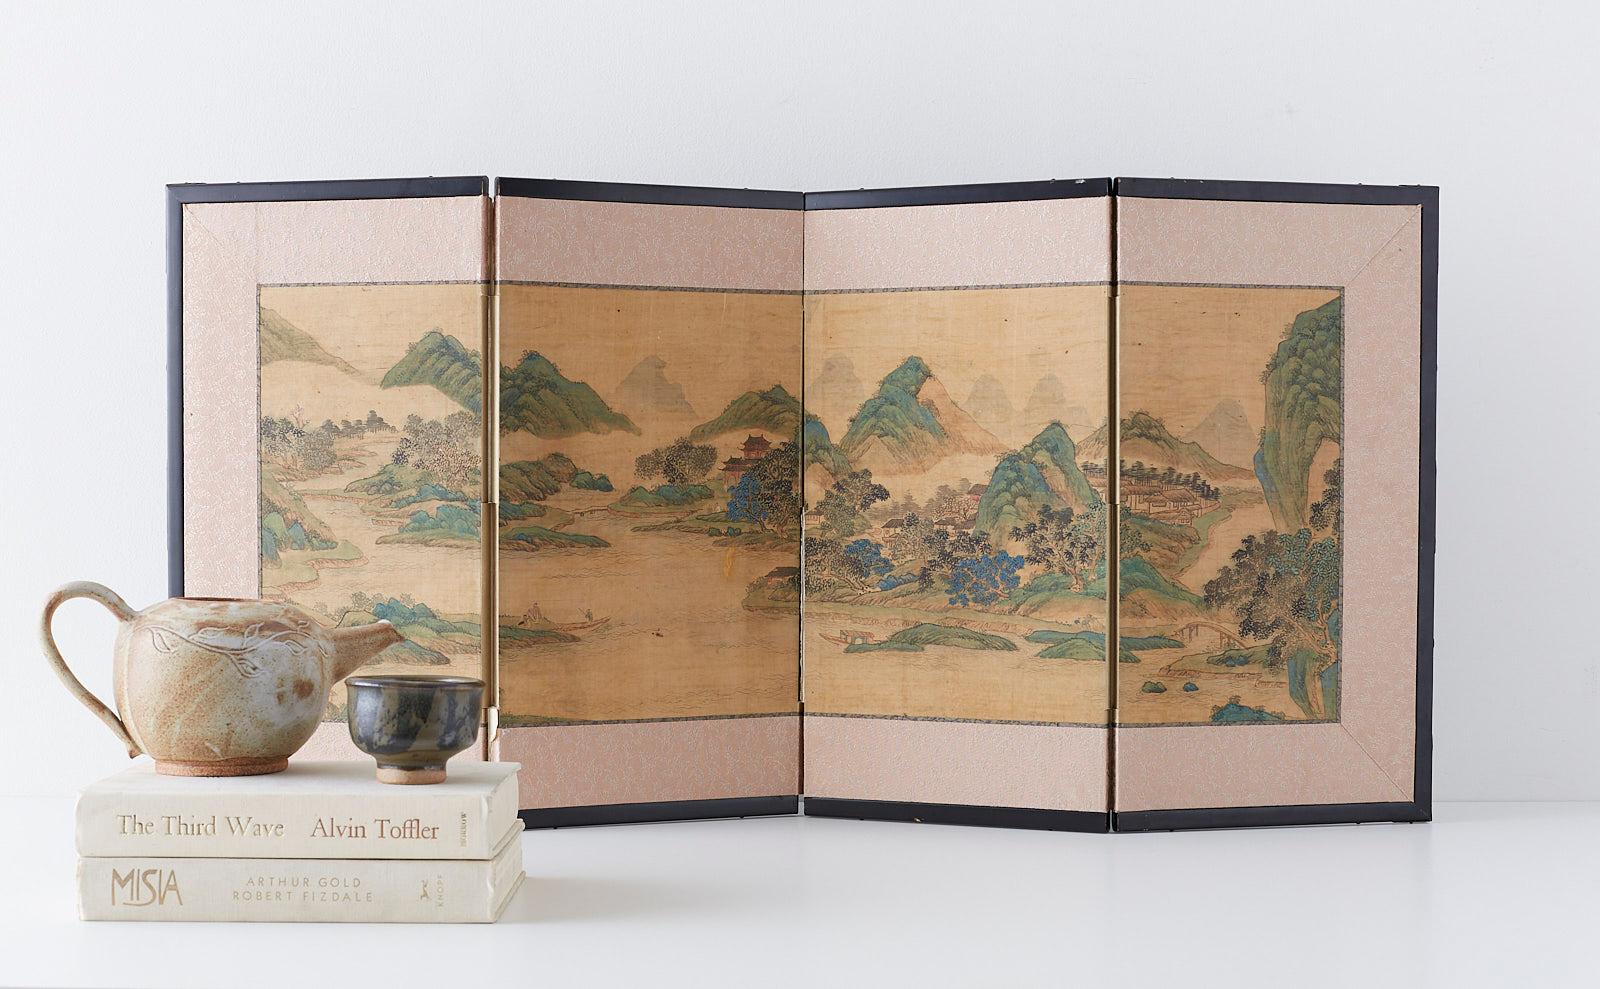 19th century mid-Edo period Japanese four-panel miniature screen. Depicting a beautifully painted Chinese blue and green landscape in the Nanga School or literati painting style. Ink and color pigments on silk mounted in a lacquered wood frame with